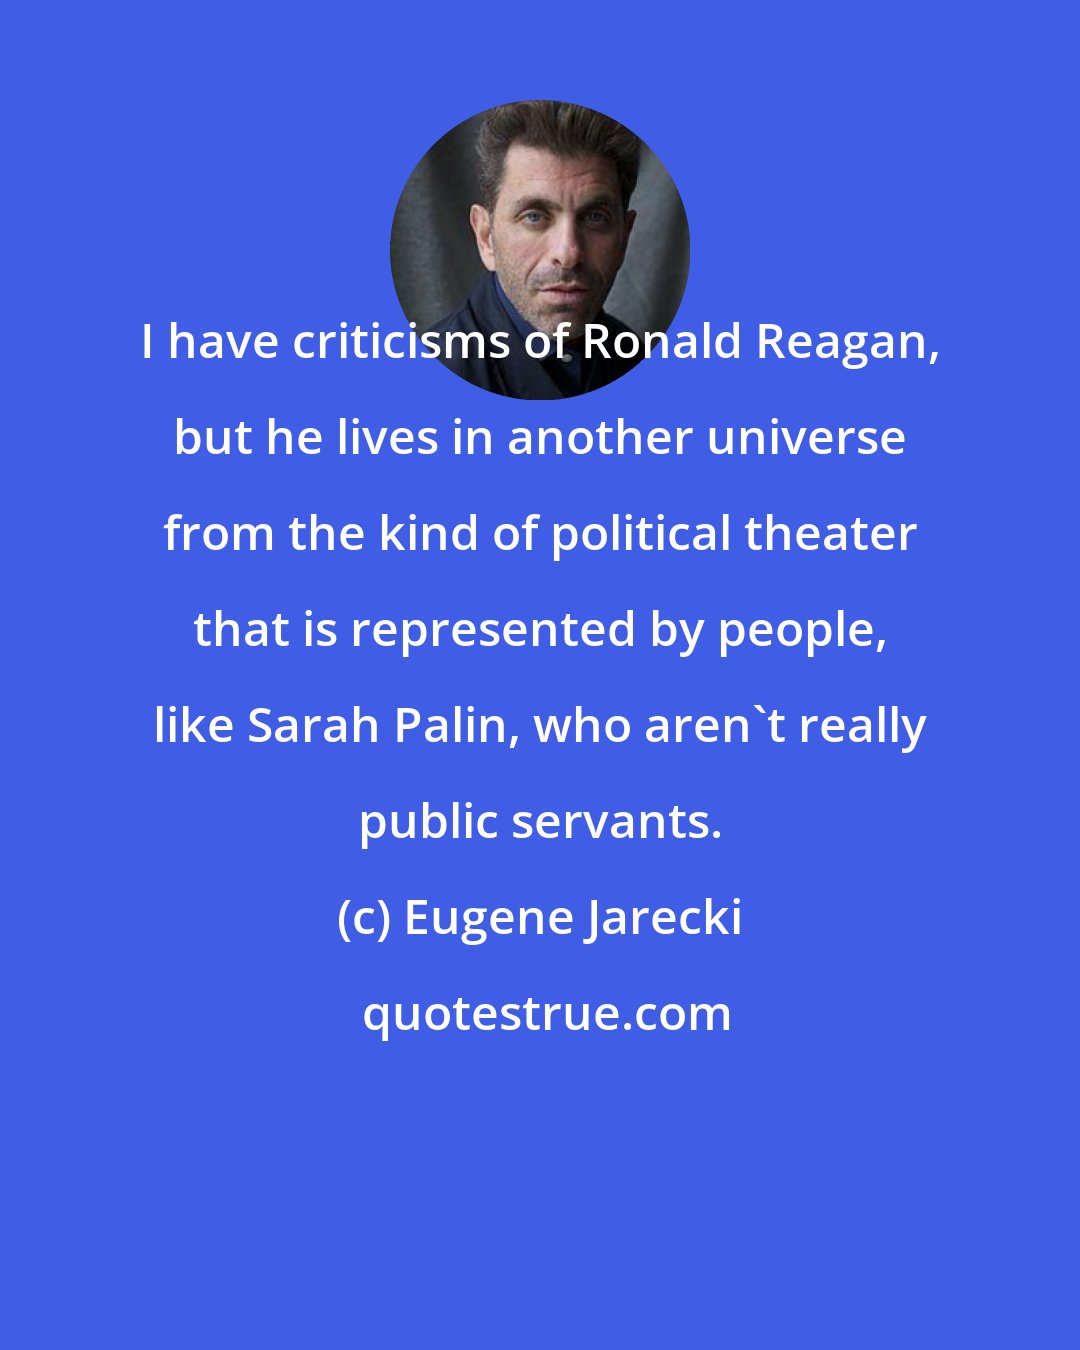 Eugene Jarecki: I have criticisms of Ronald Reagan, but he lives in another universe from the kind of political theater that is represented by people, like Sarah Palin, who aren't really public servants.